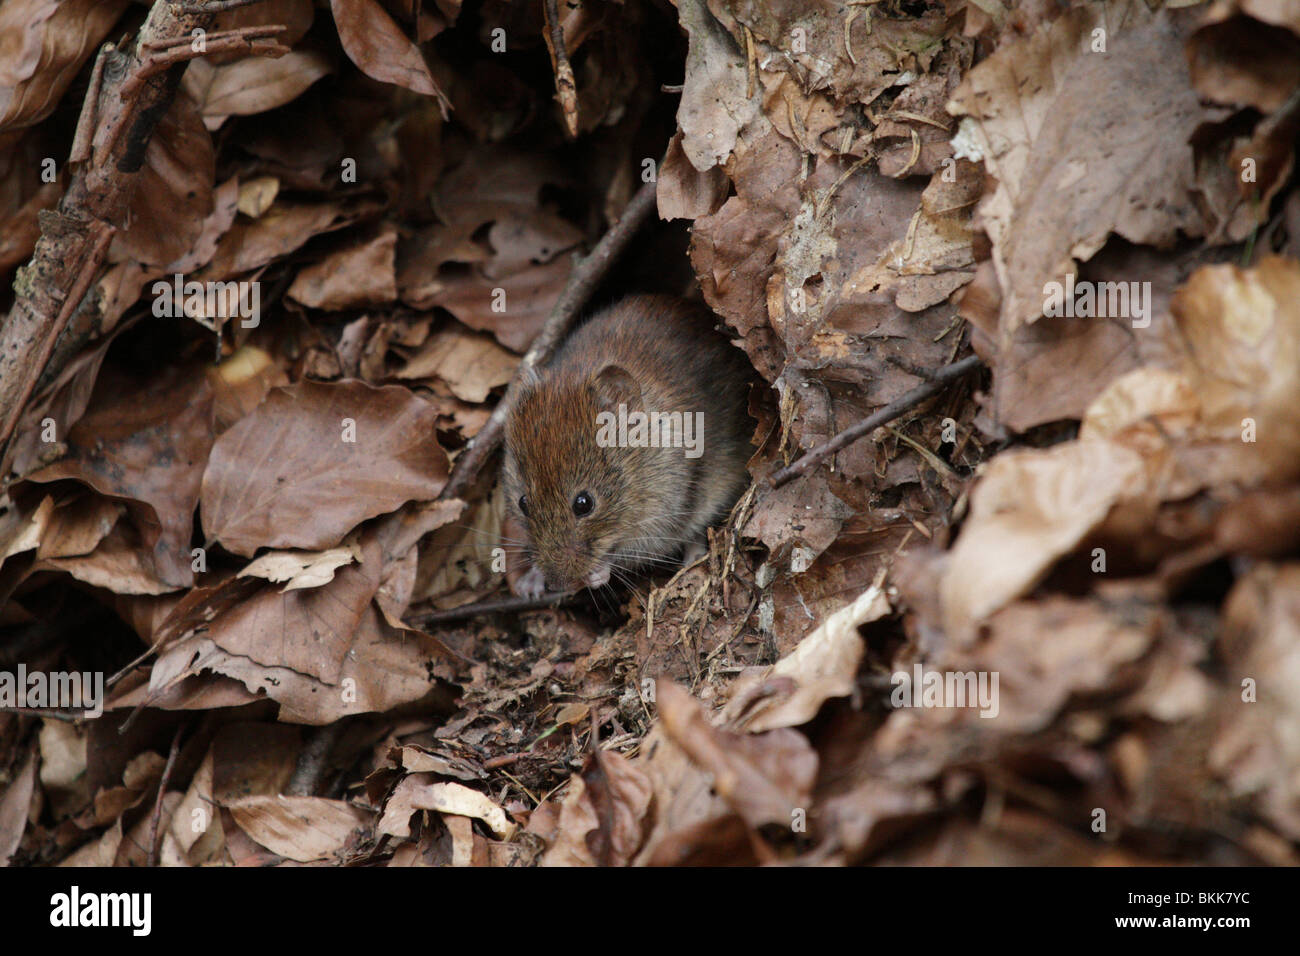 Bank vole mouse (Myodes glareolus) in its natural habitat. They are (pretty cute) vectors for the Hanta virus. Stock Photo